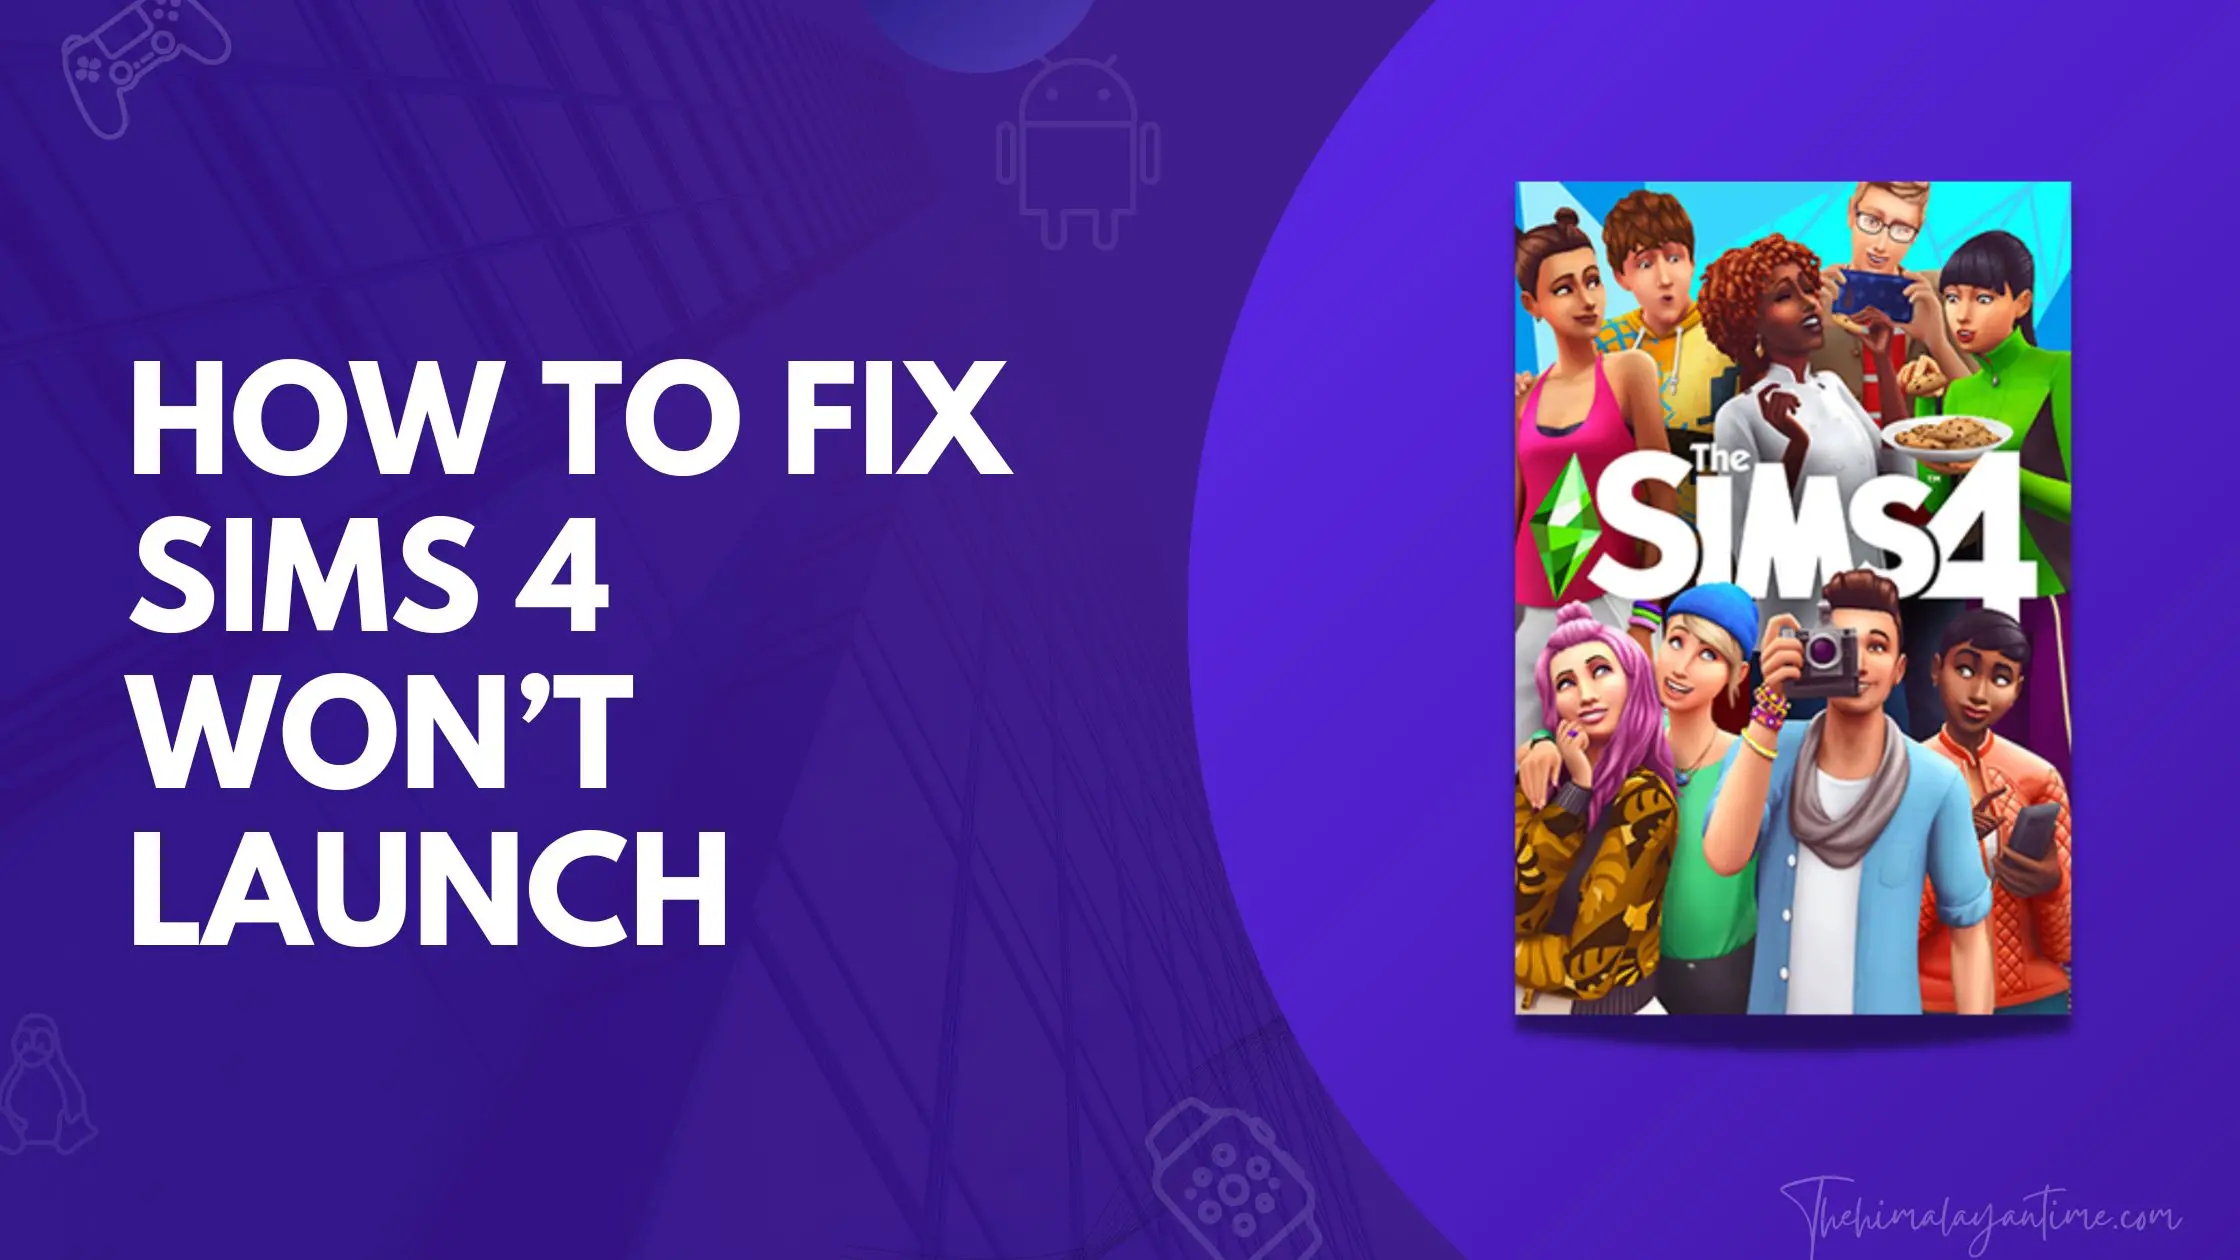 How To Fix Sims 4 Won’t Launch